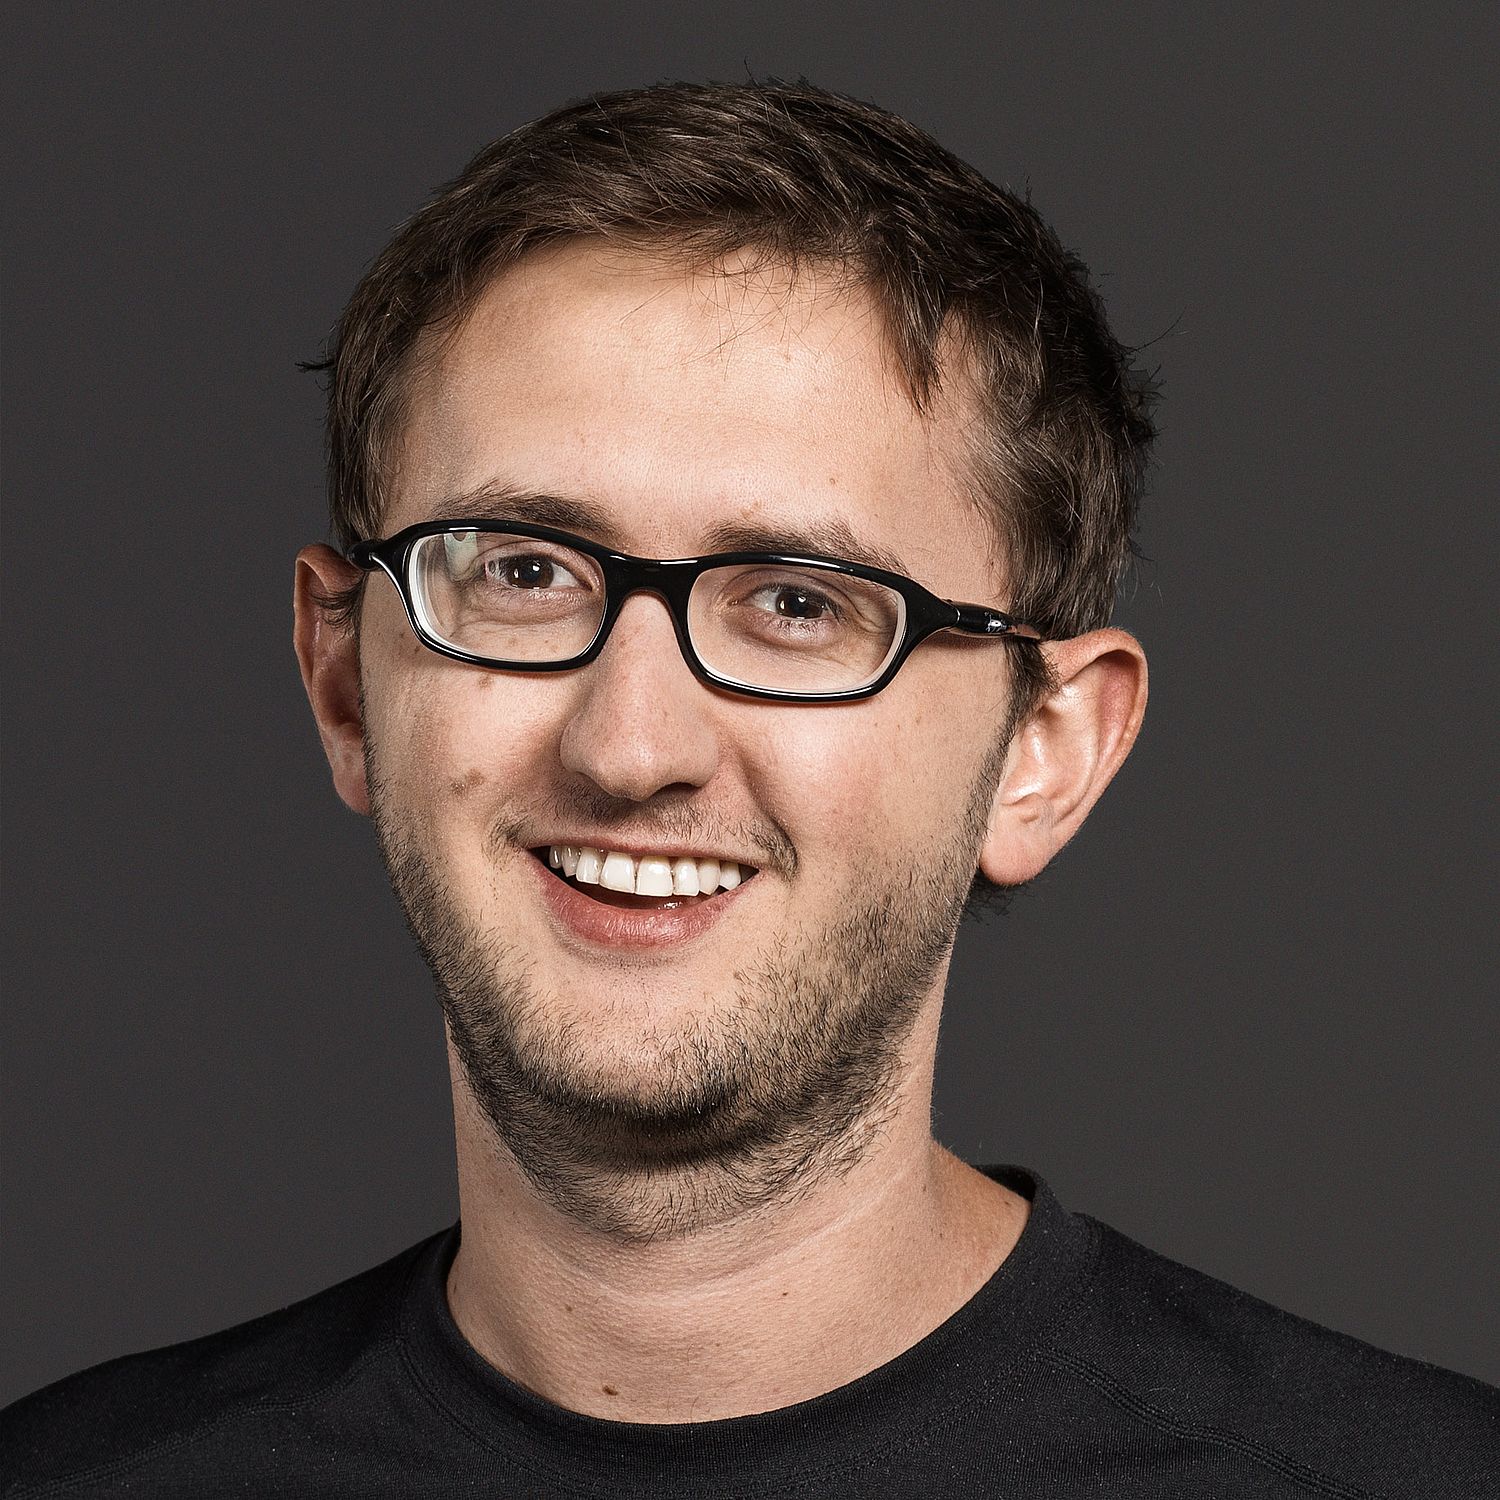 Interview with Benni: TYPO3 for Everyone!